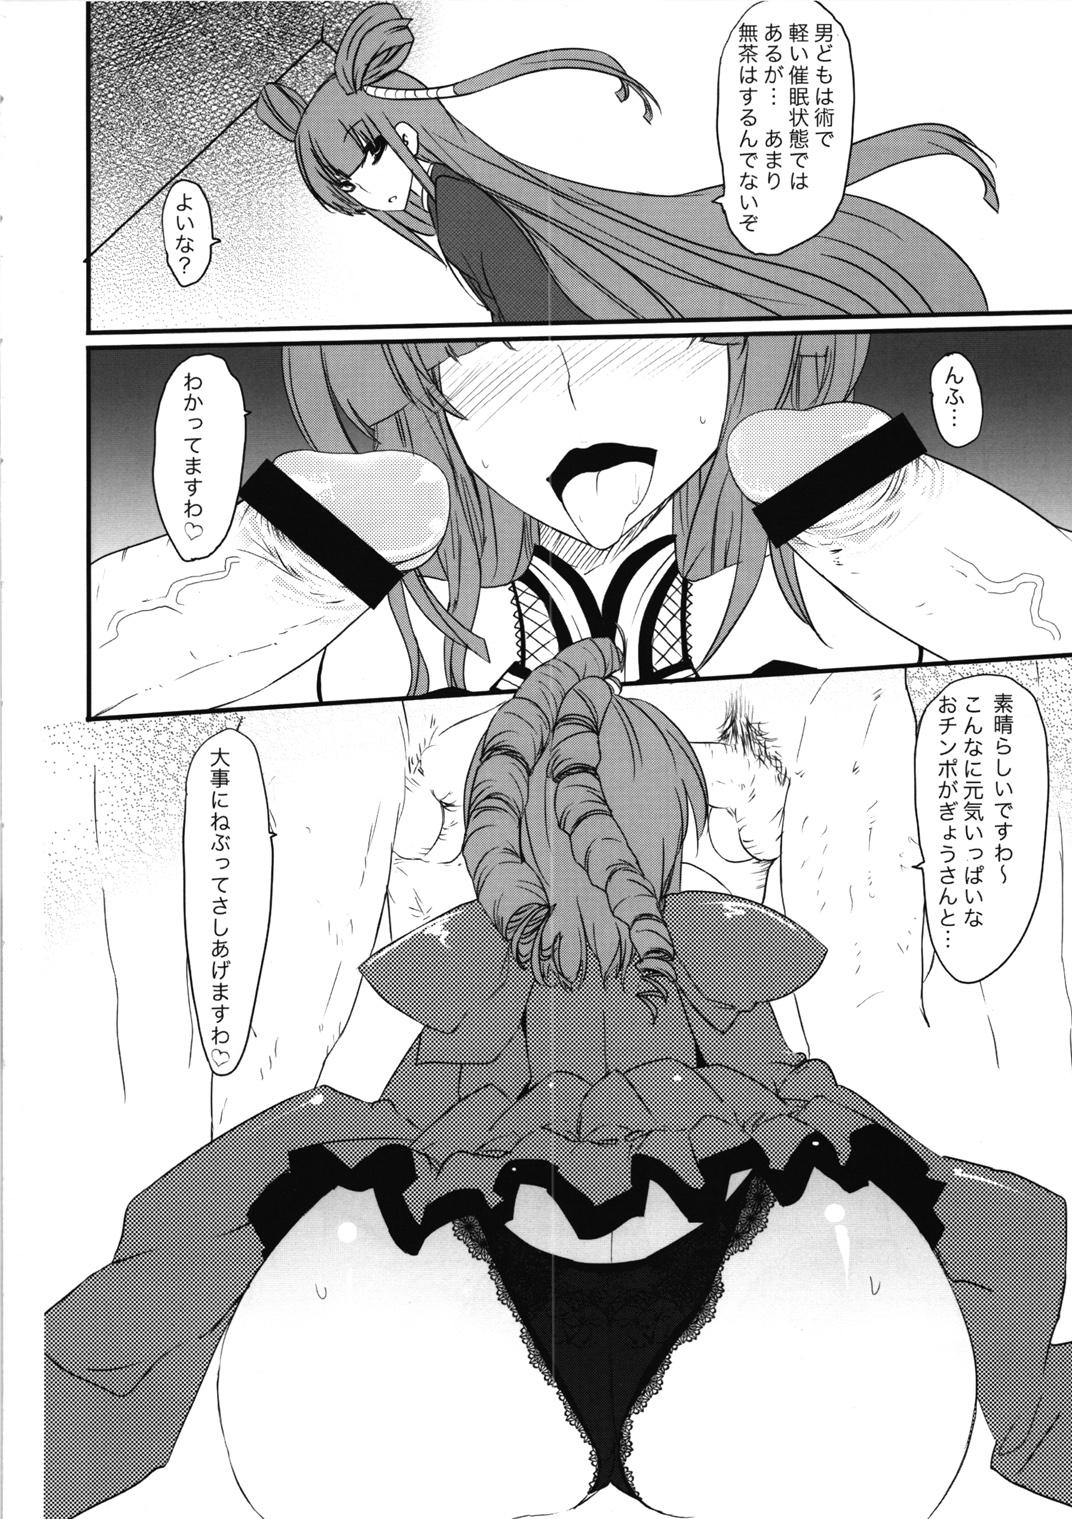 Tied Party Light - Beatmania Lingerie - Page 5